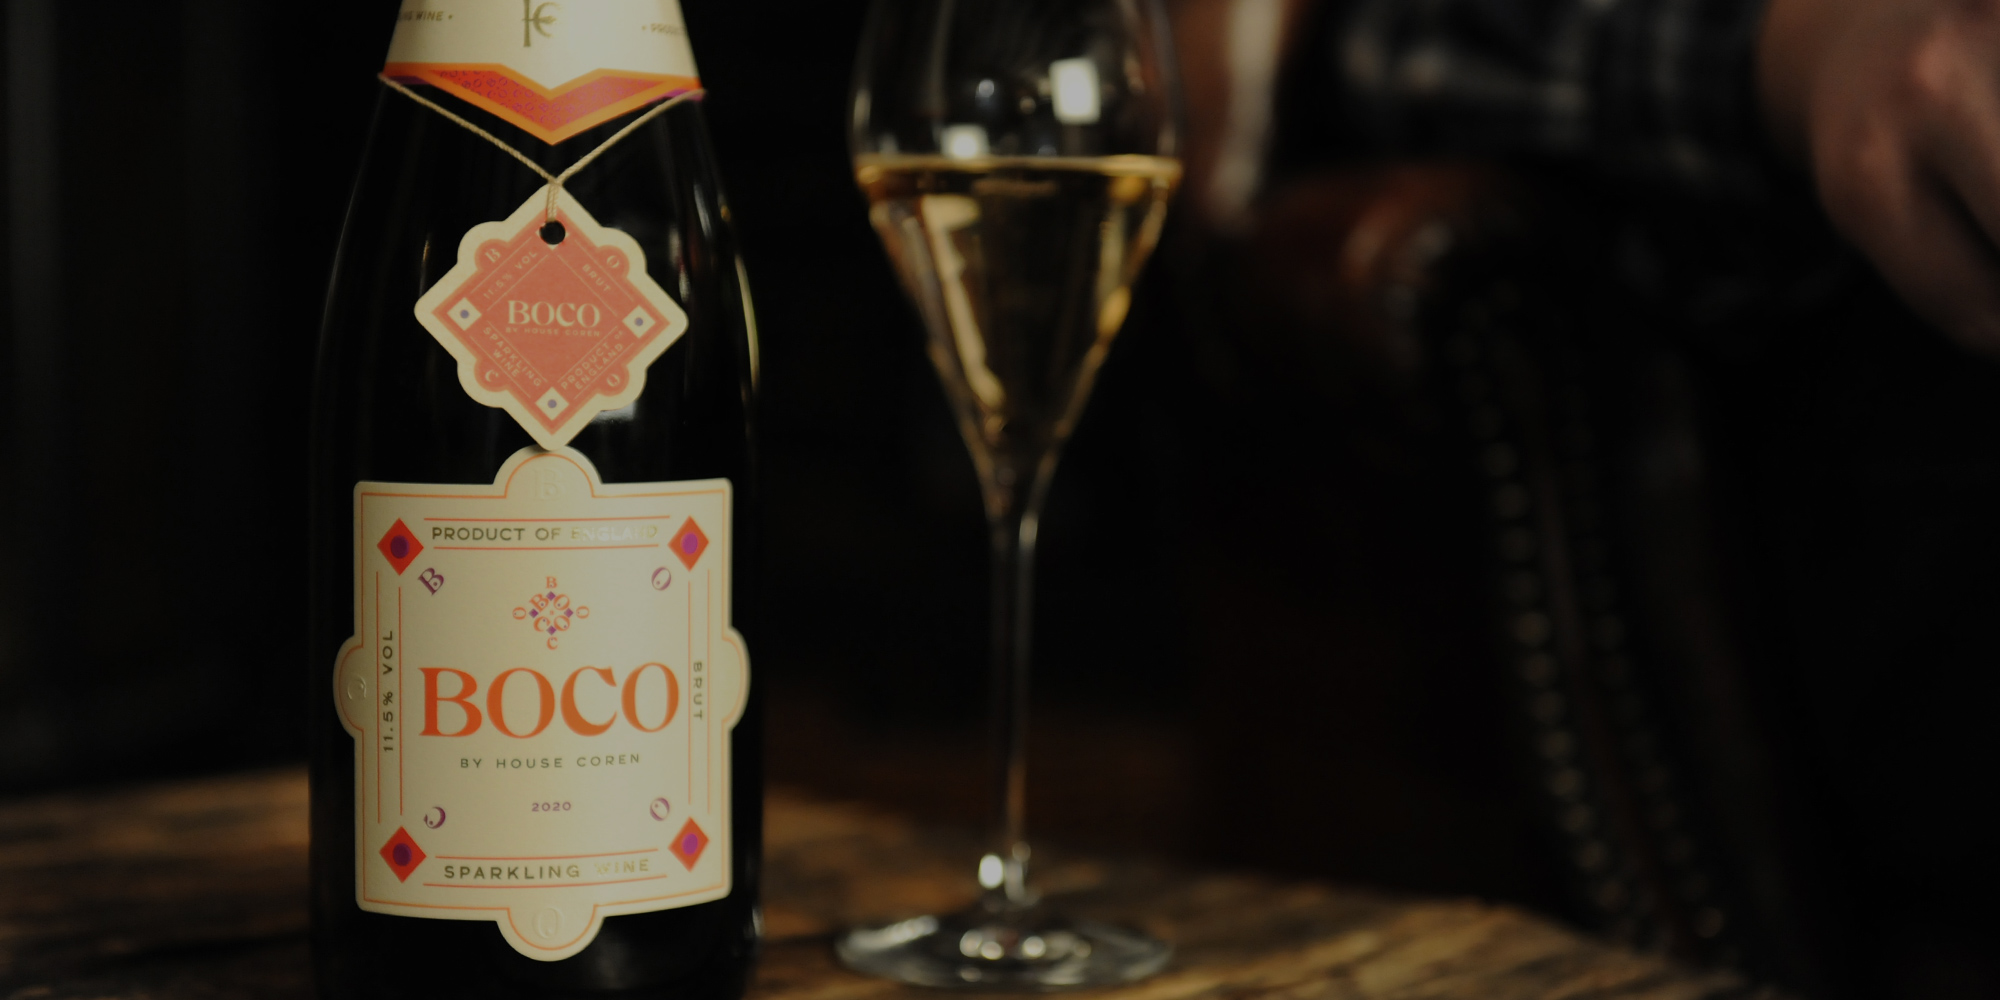 House Coren vineyard, winery and négociant West Sussex. Producers of Boco sparkling wine.